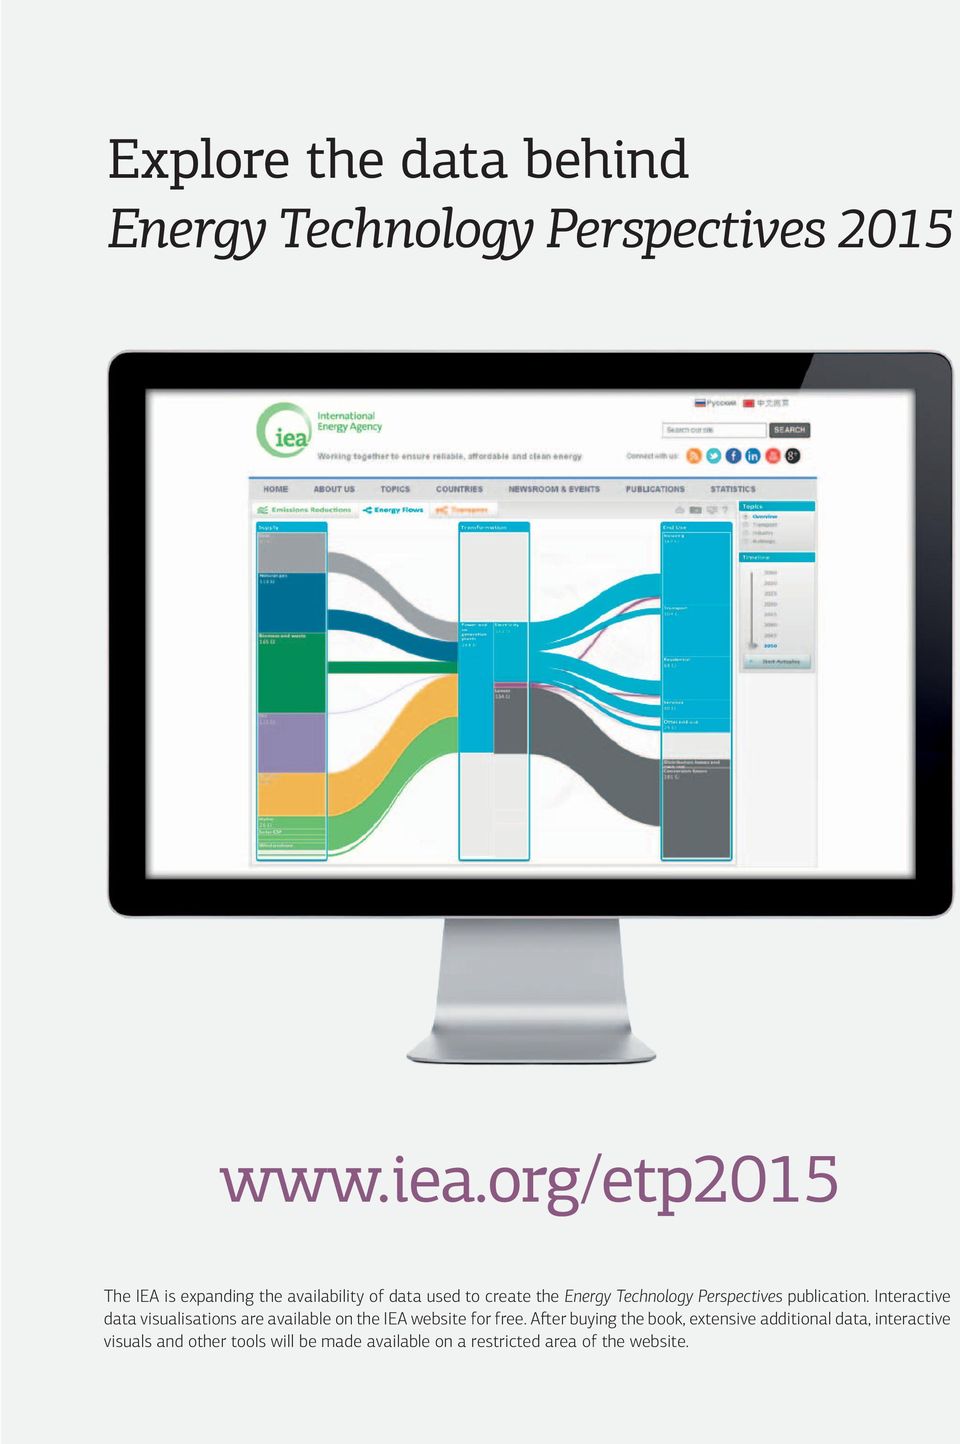 Perspectives publication. Interactive data visualisations are available on the IEA website for free.